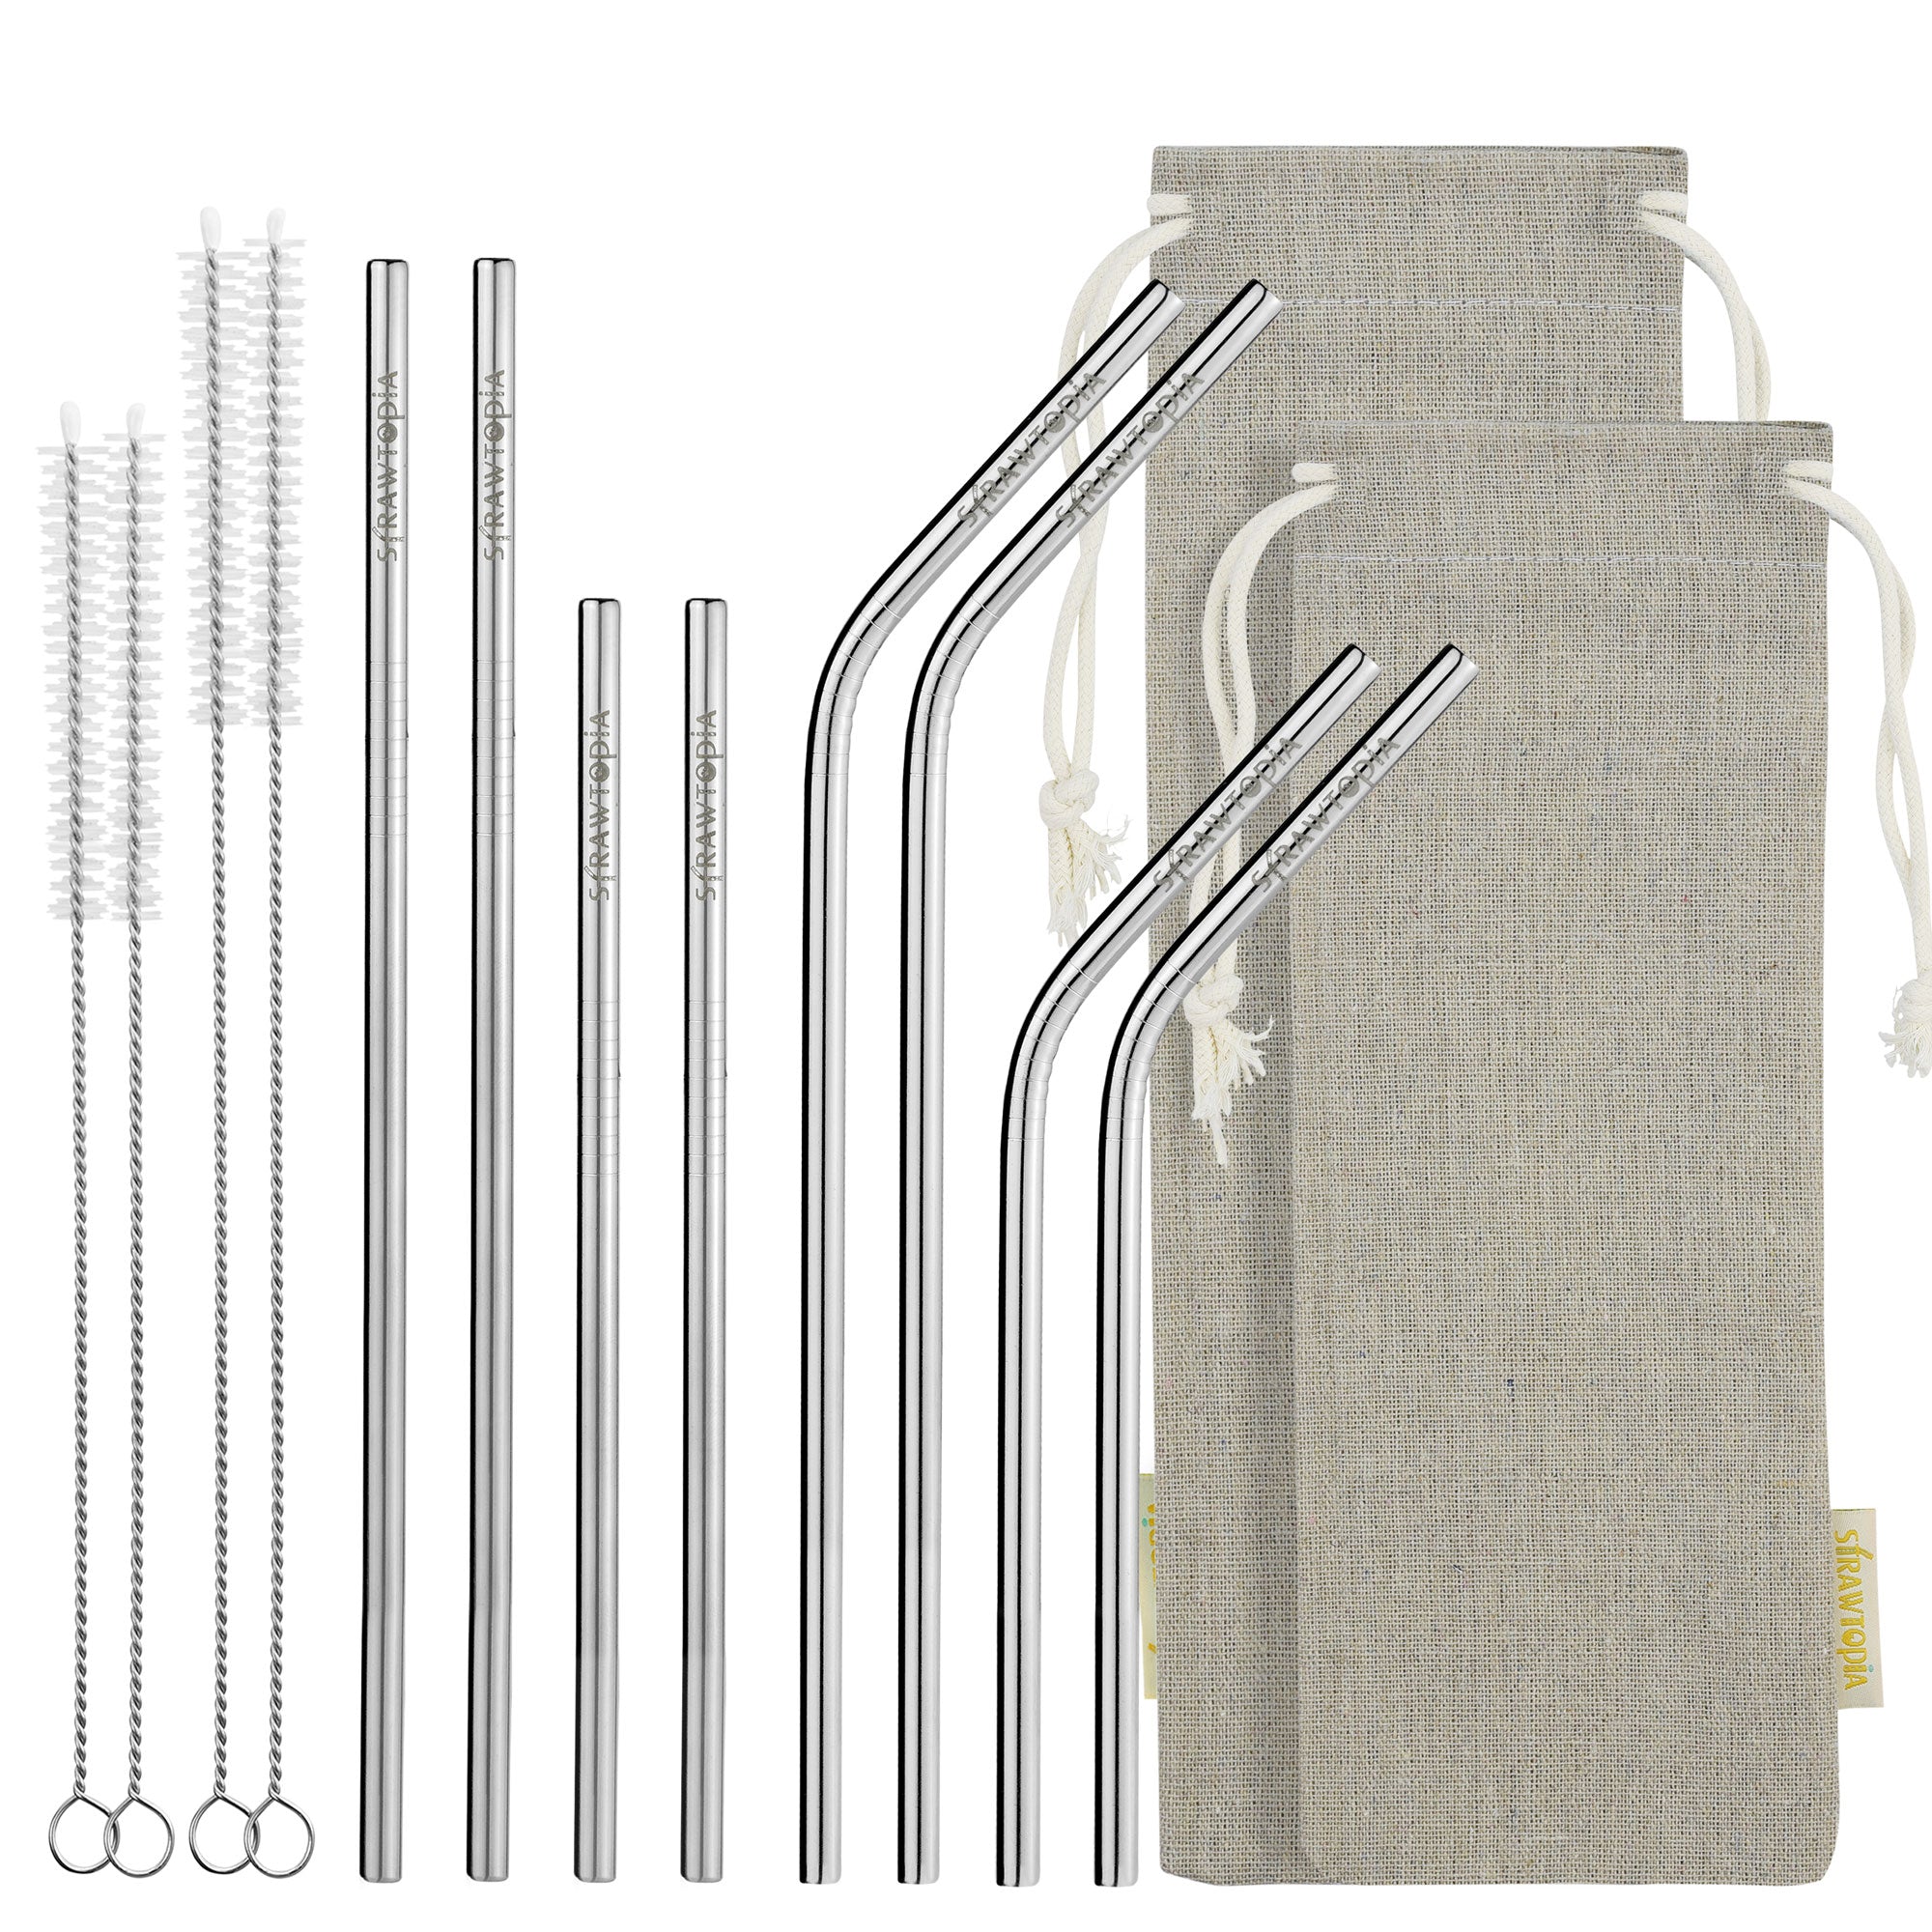 11 PC Set Reusable Metal Straws with Cleaning Brushes 8.5 inches